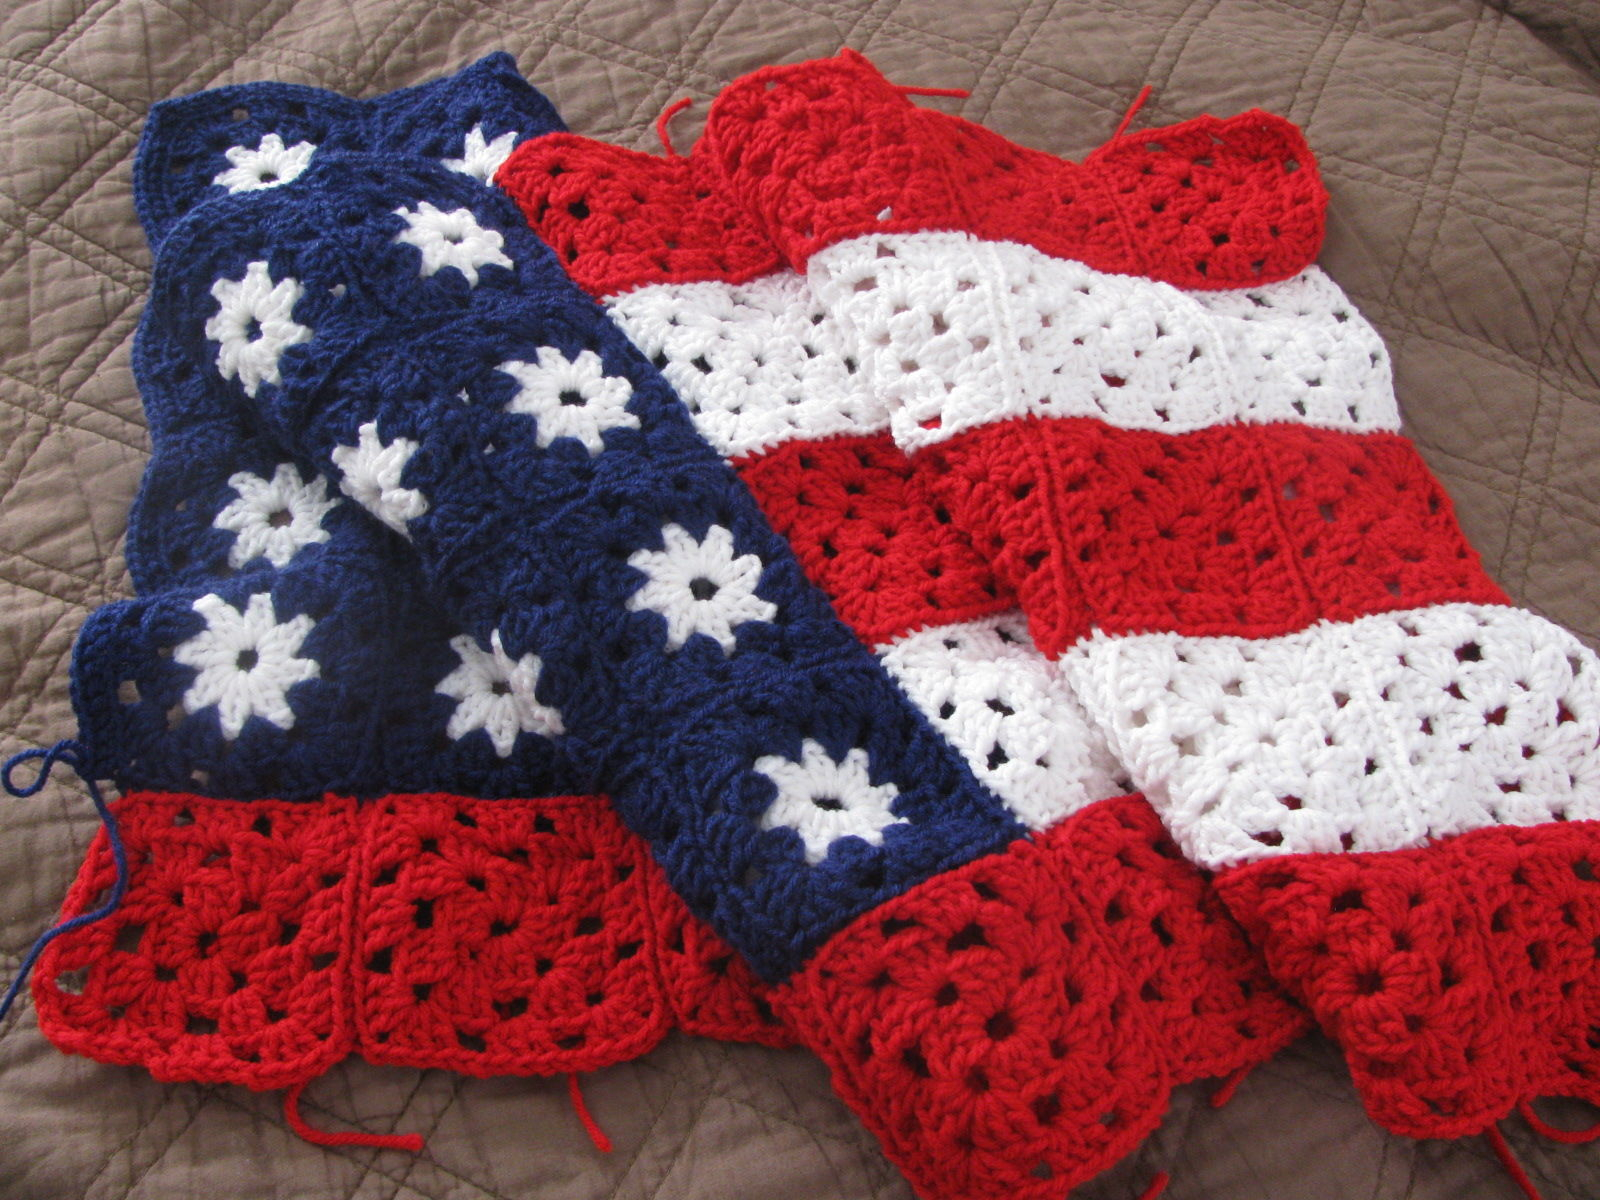 American Flag Crochet Pattern American Flag Crochet Pictures Photos And Images For Facebook